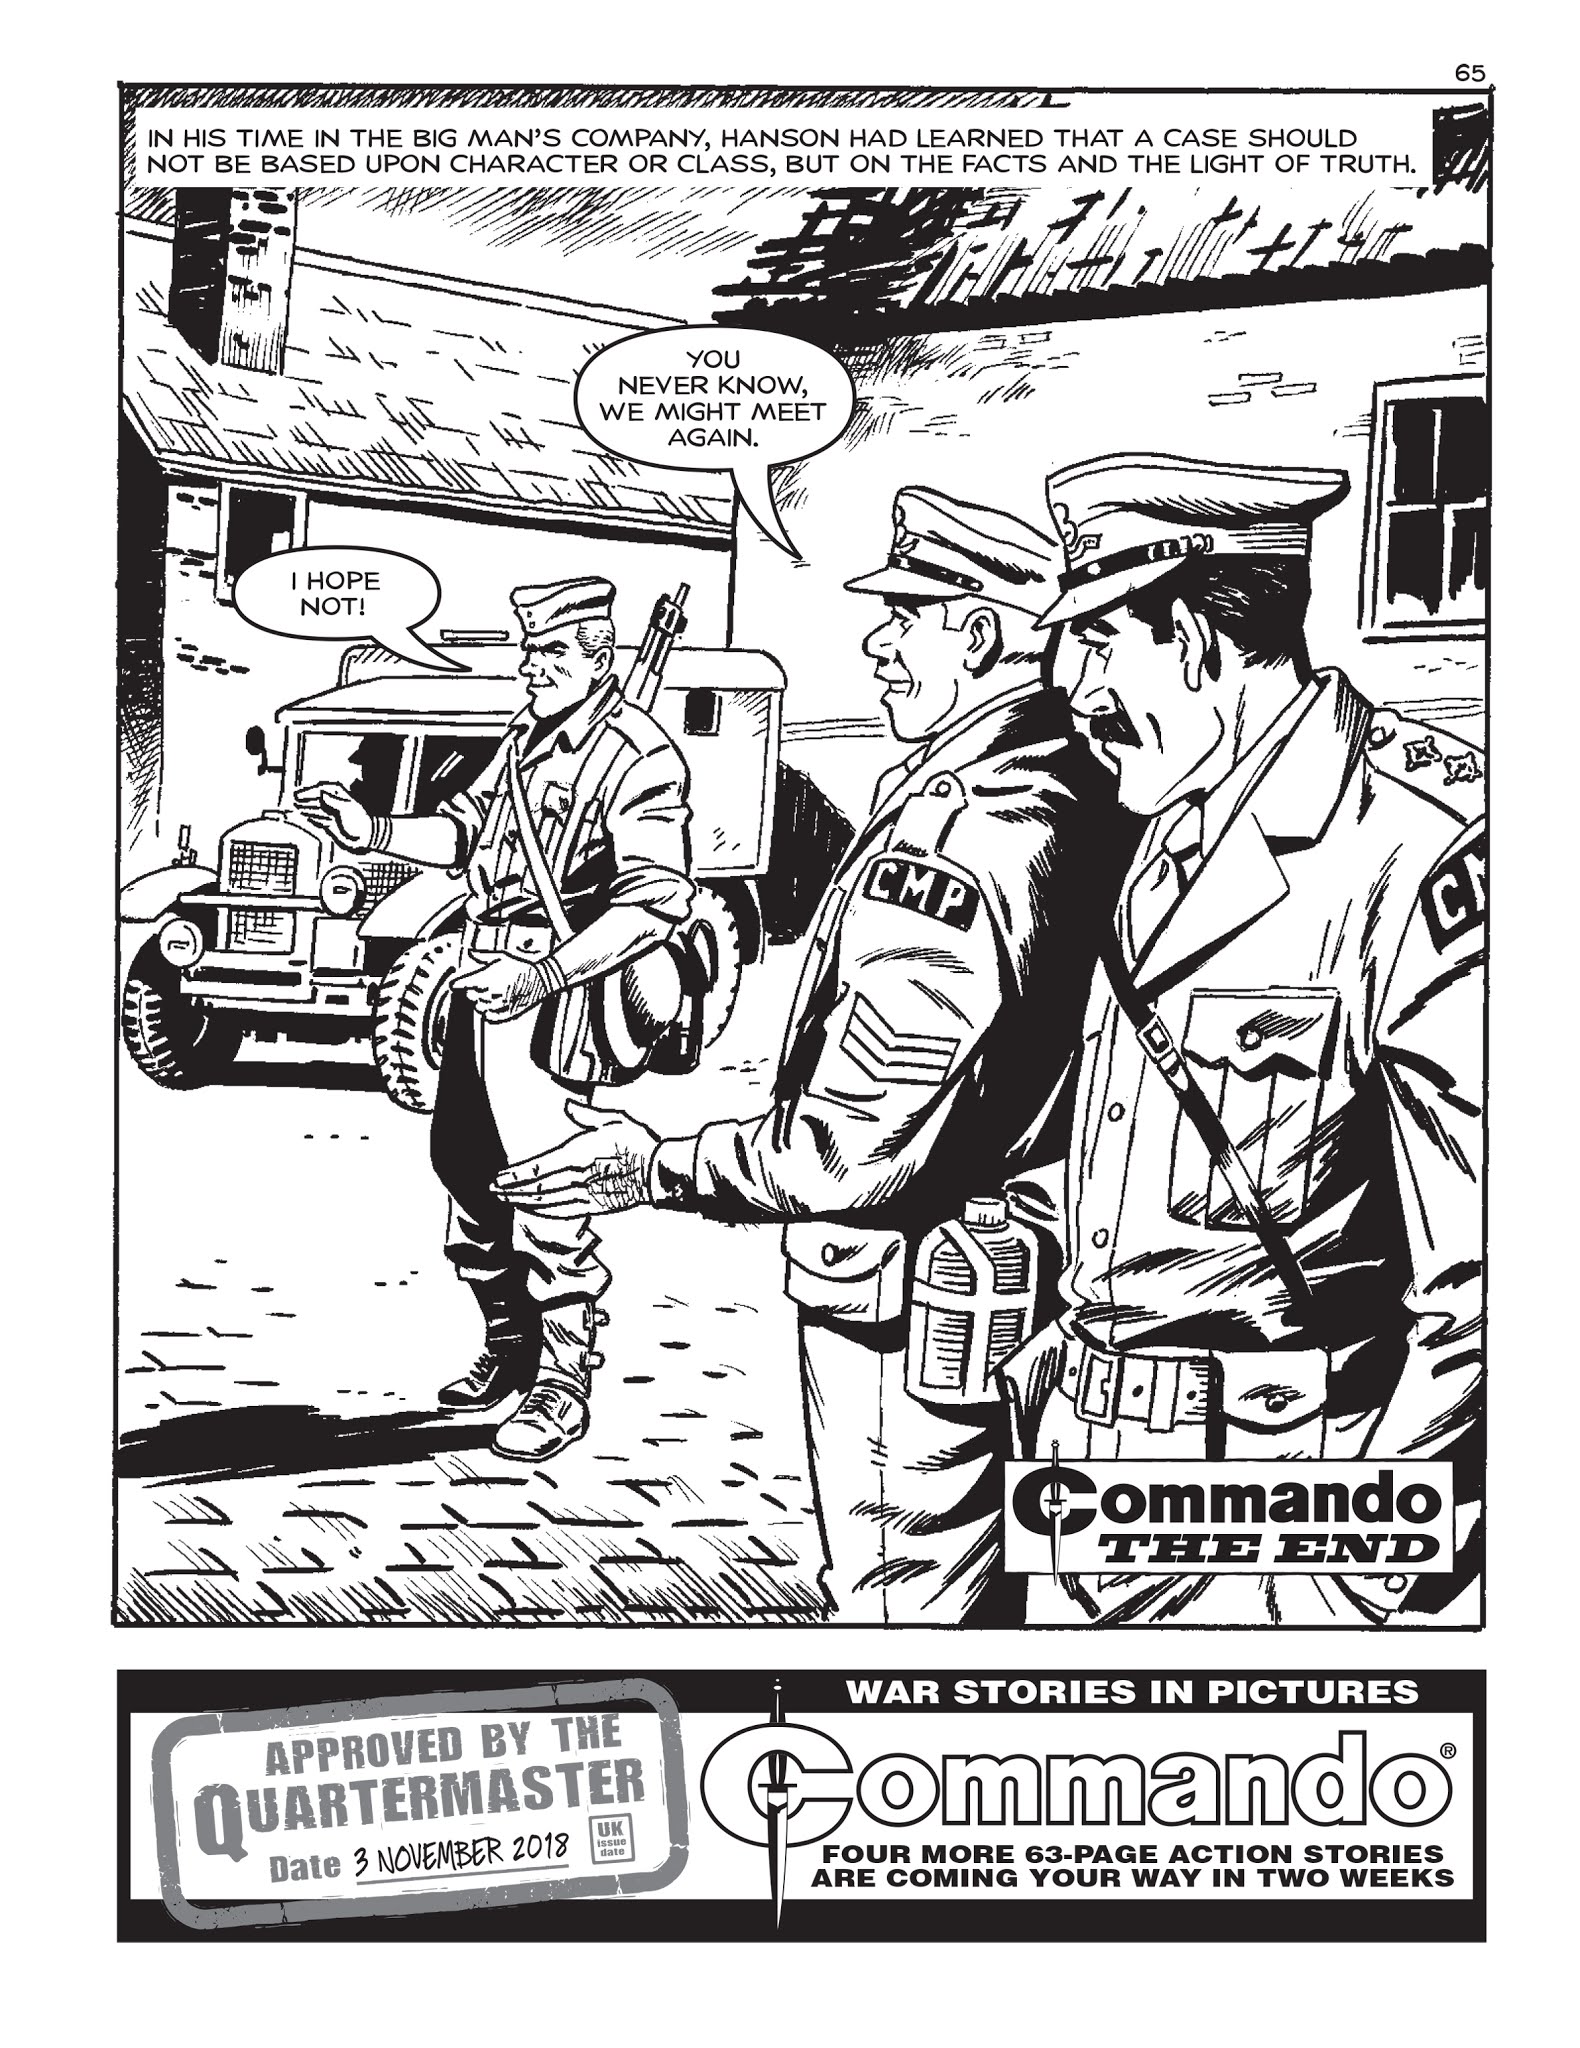 Read online Commando: For Action and Adventure comic -  Issue #5167 - 64